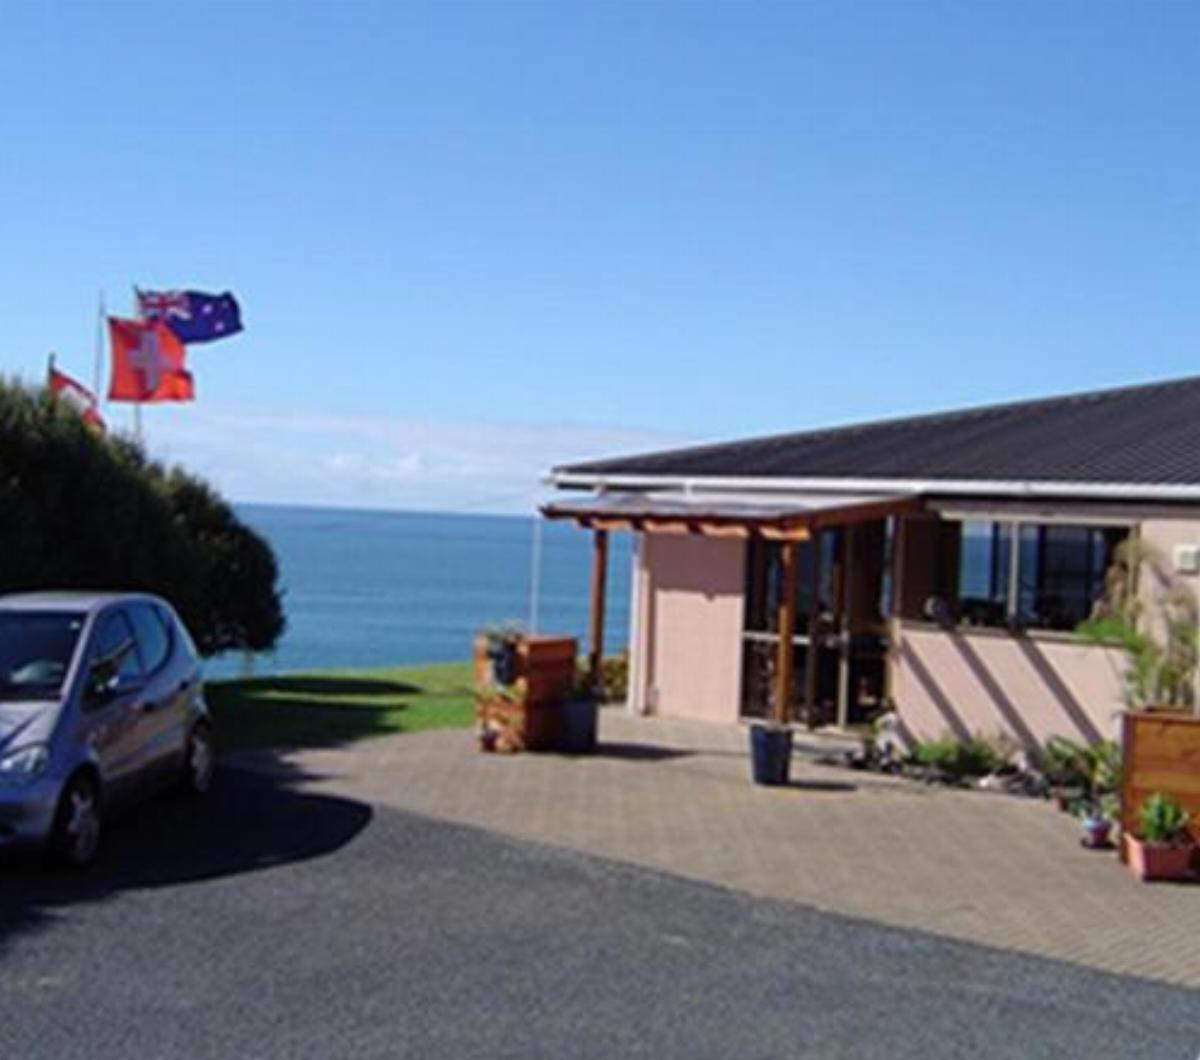 Carneval Ocean View Hotel Cable Bay New Zealand